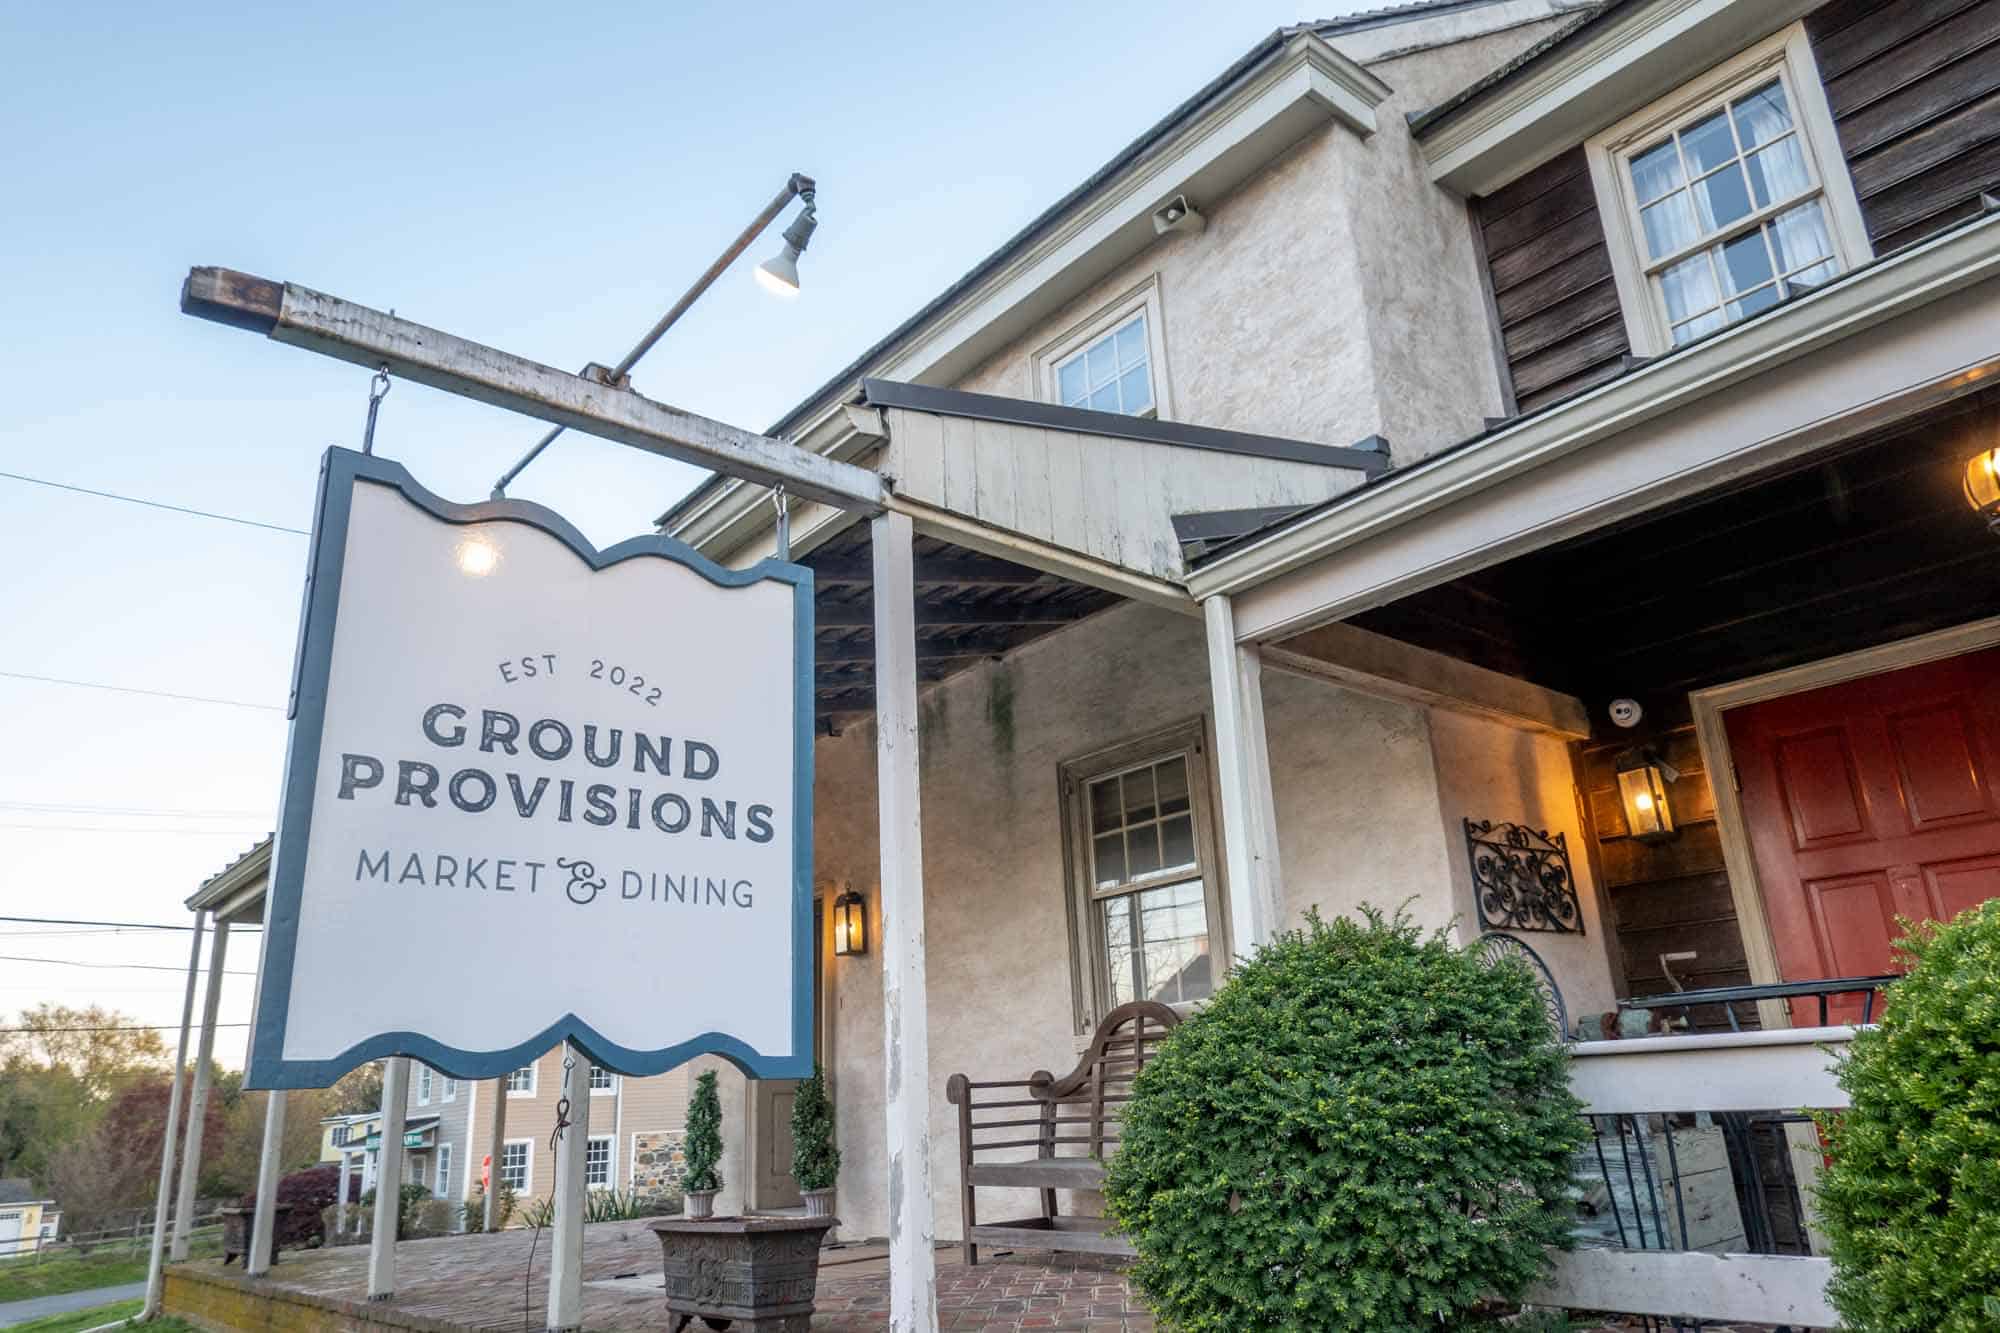 Sign saying Ground Provisions Market & Dining